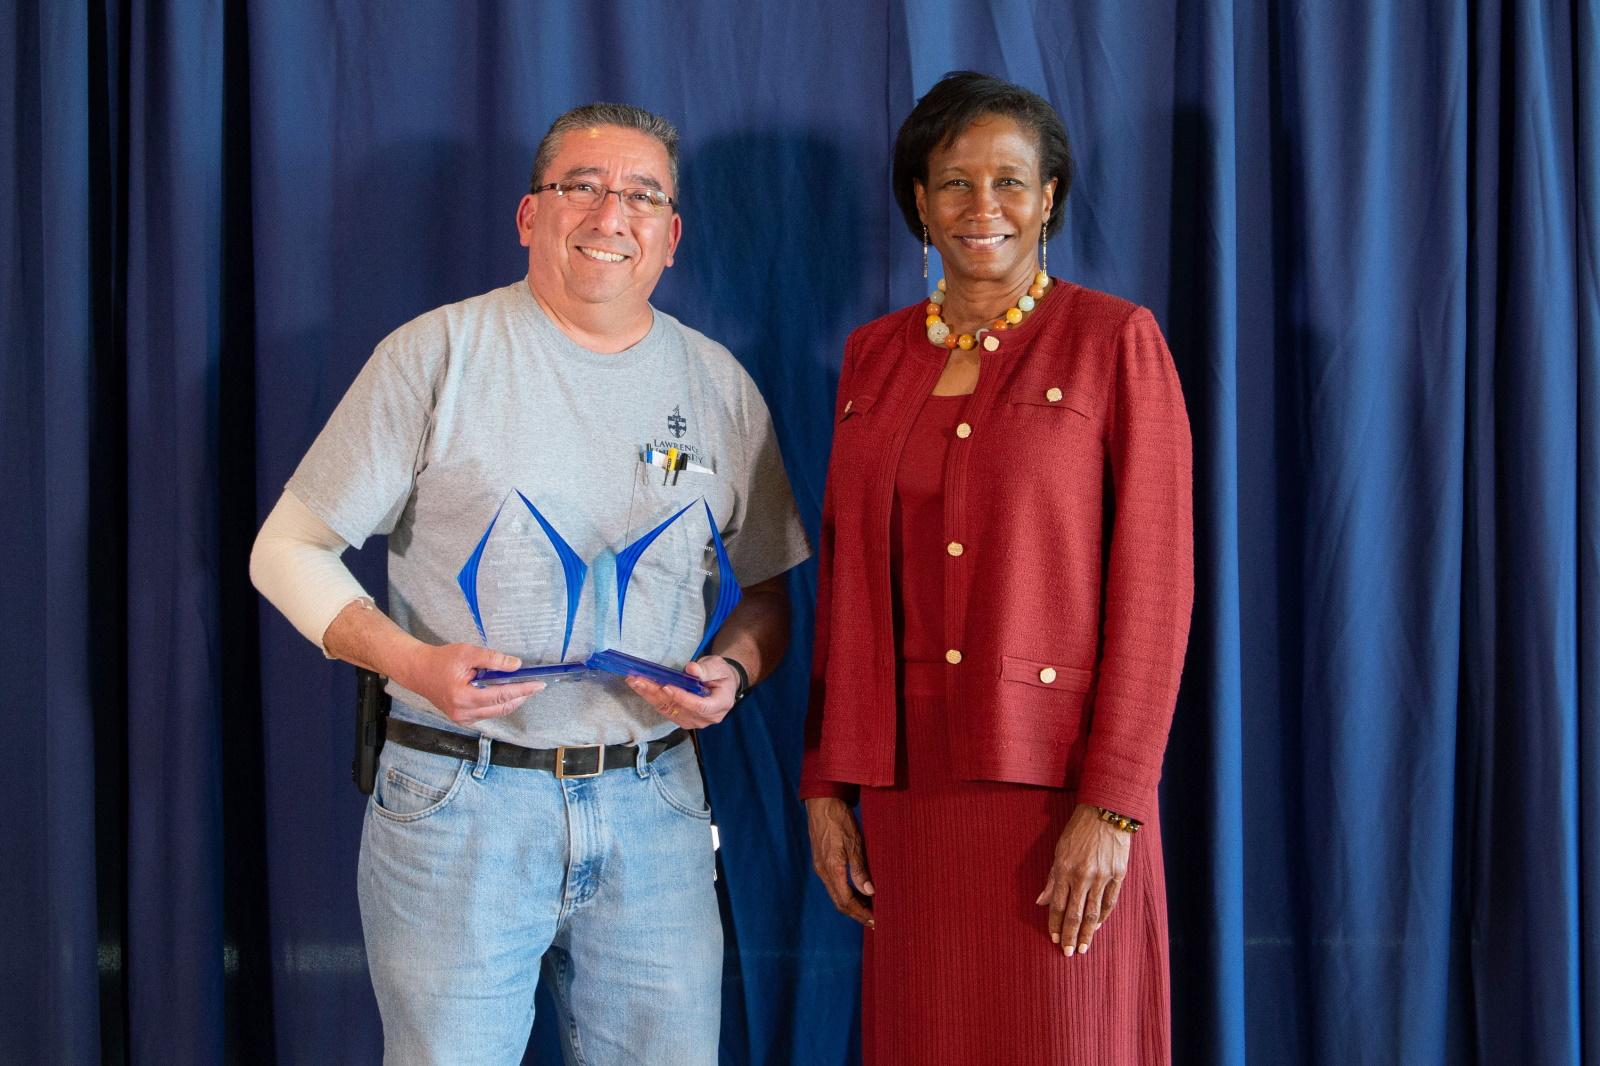 Bob Guzman holds his two awards as he poses for a photo with President Laurie Carter.